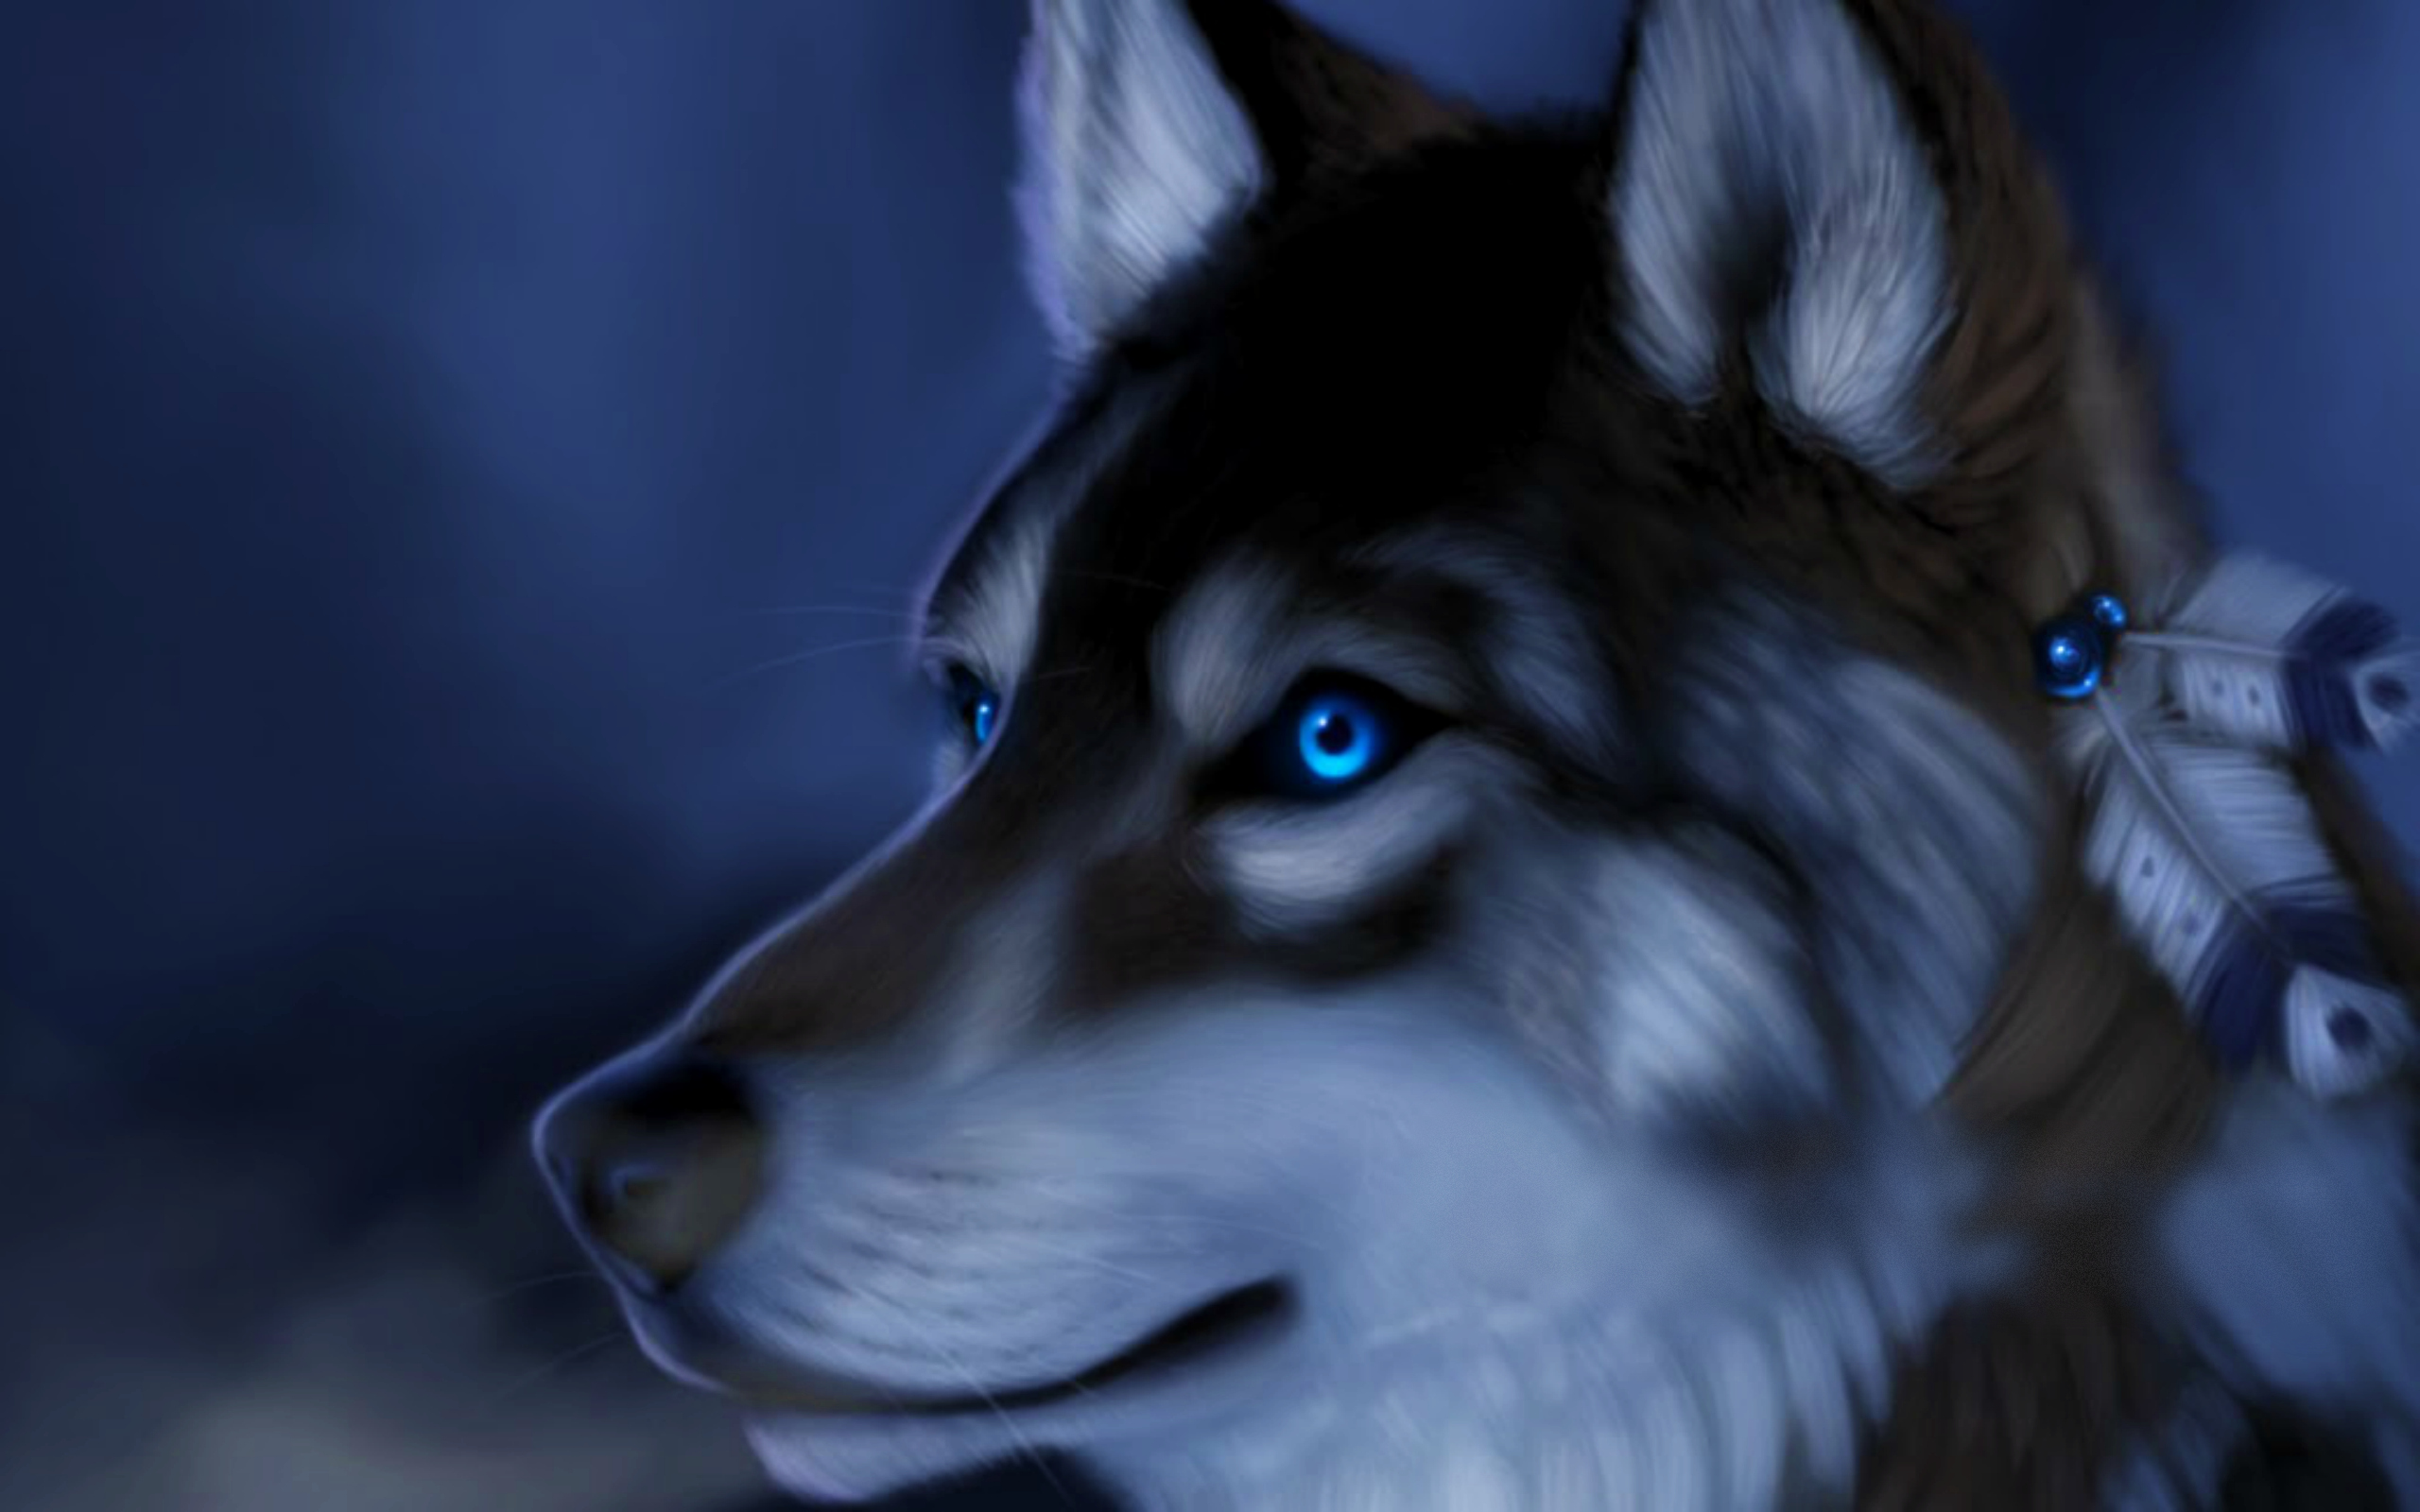 anime white wolf with blue eyes